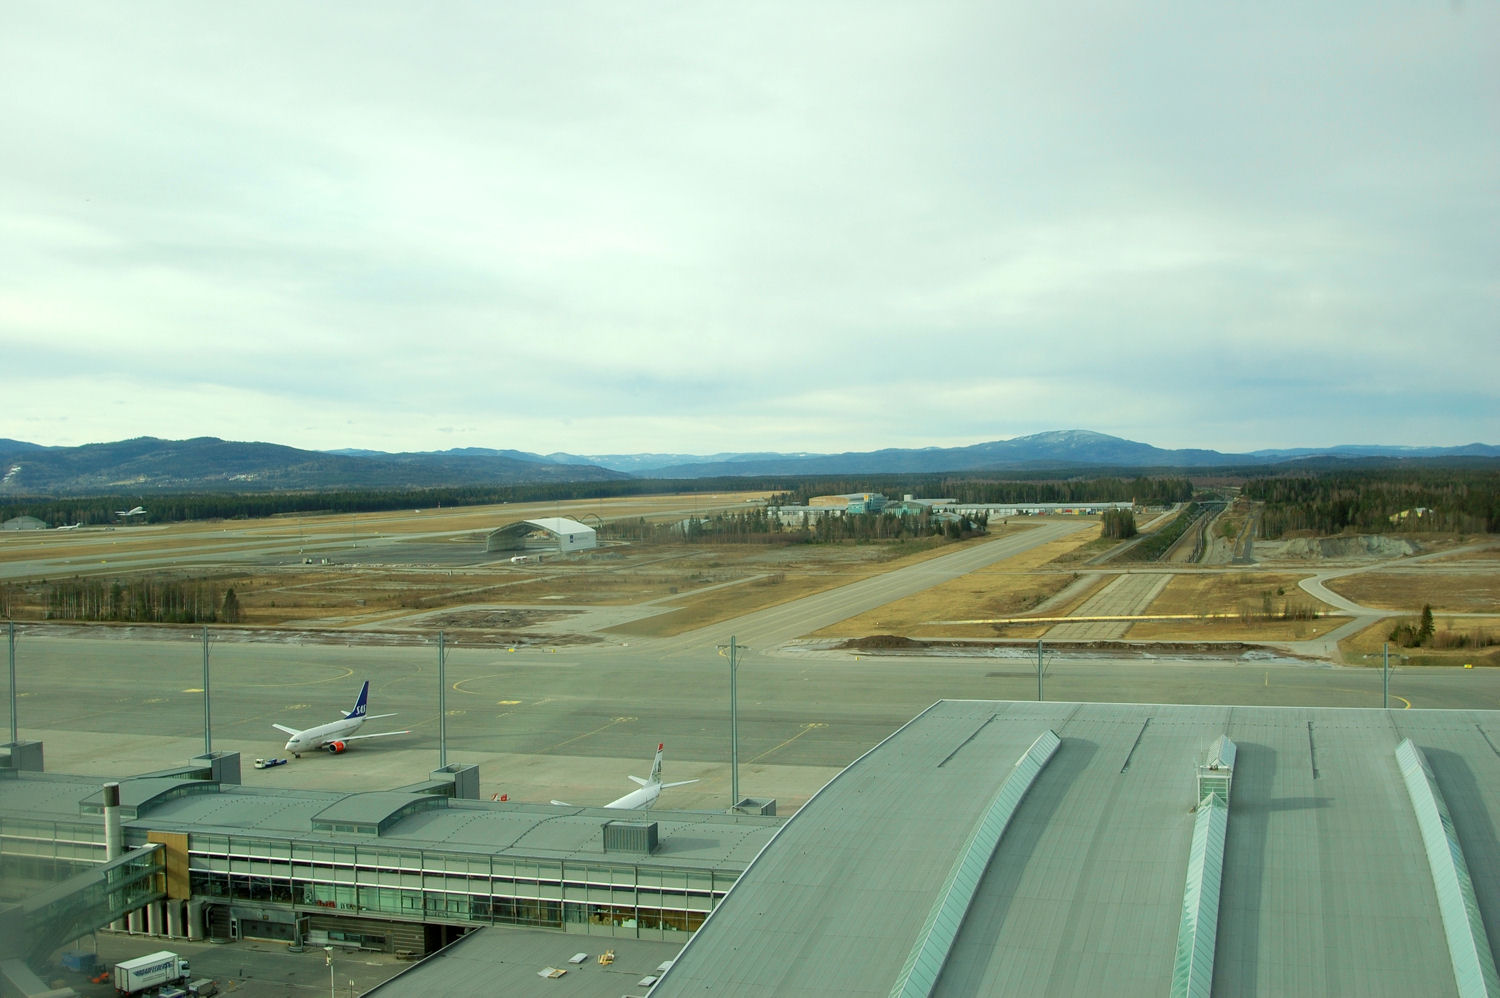 View from the tower at Oslo Airport. Photo: Pål Stagnes